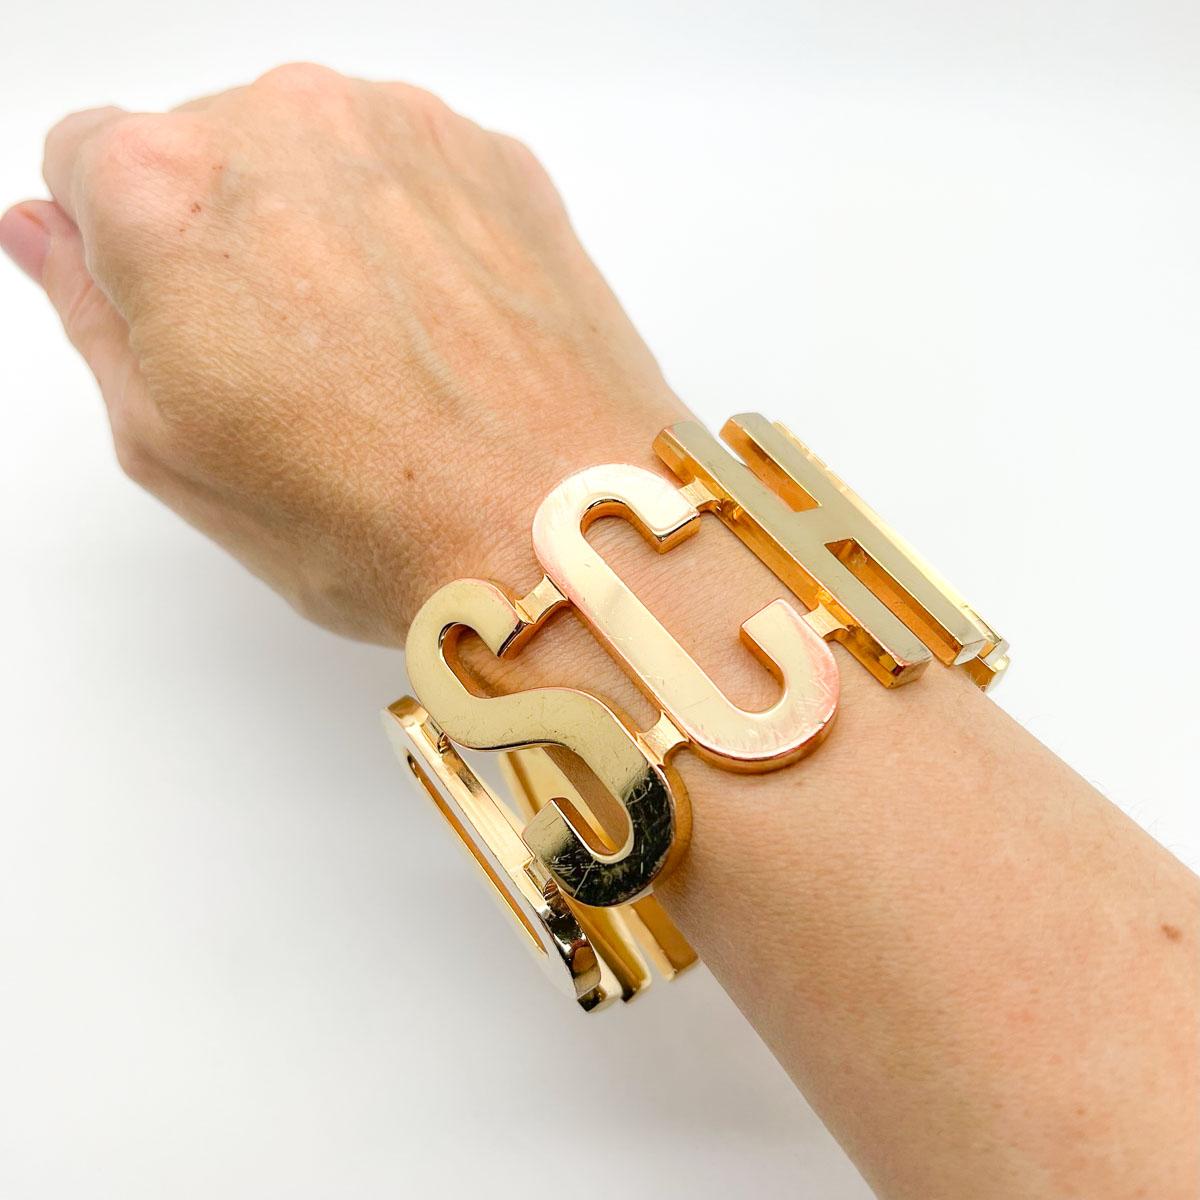 A rare Vintage MOSCHINO Letter Cuff. A large and impressive logo lovers find; this cuff leaves no doubt as to its origin. The ultimate in runway edge this one will prove the logo lovers dream on every outing.
Moschino: Founded in 1983 by Franco